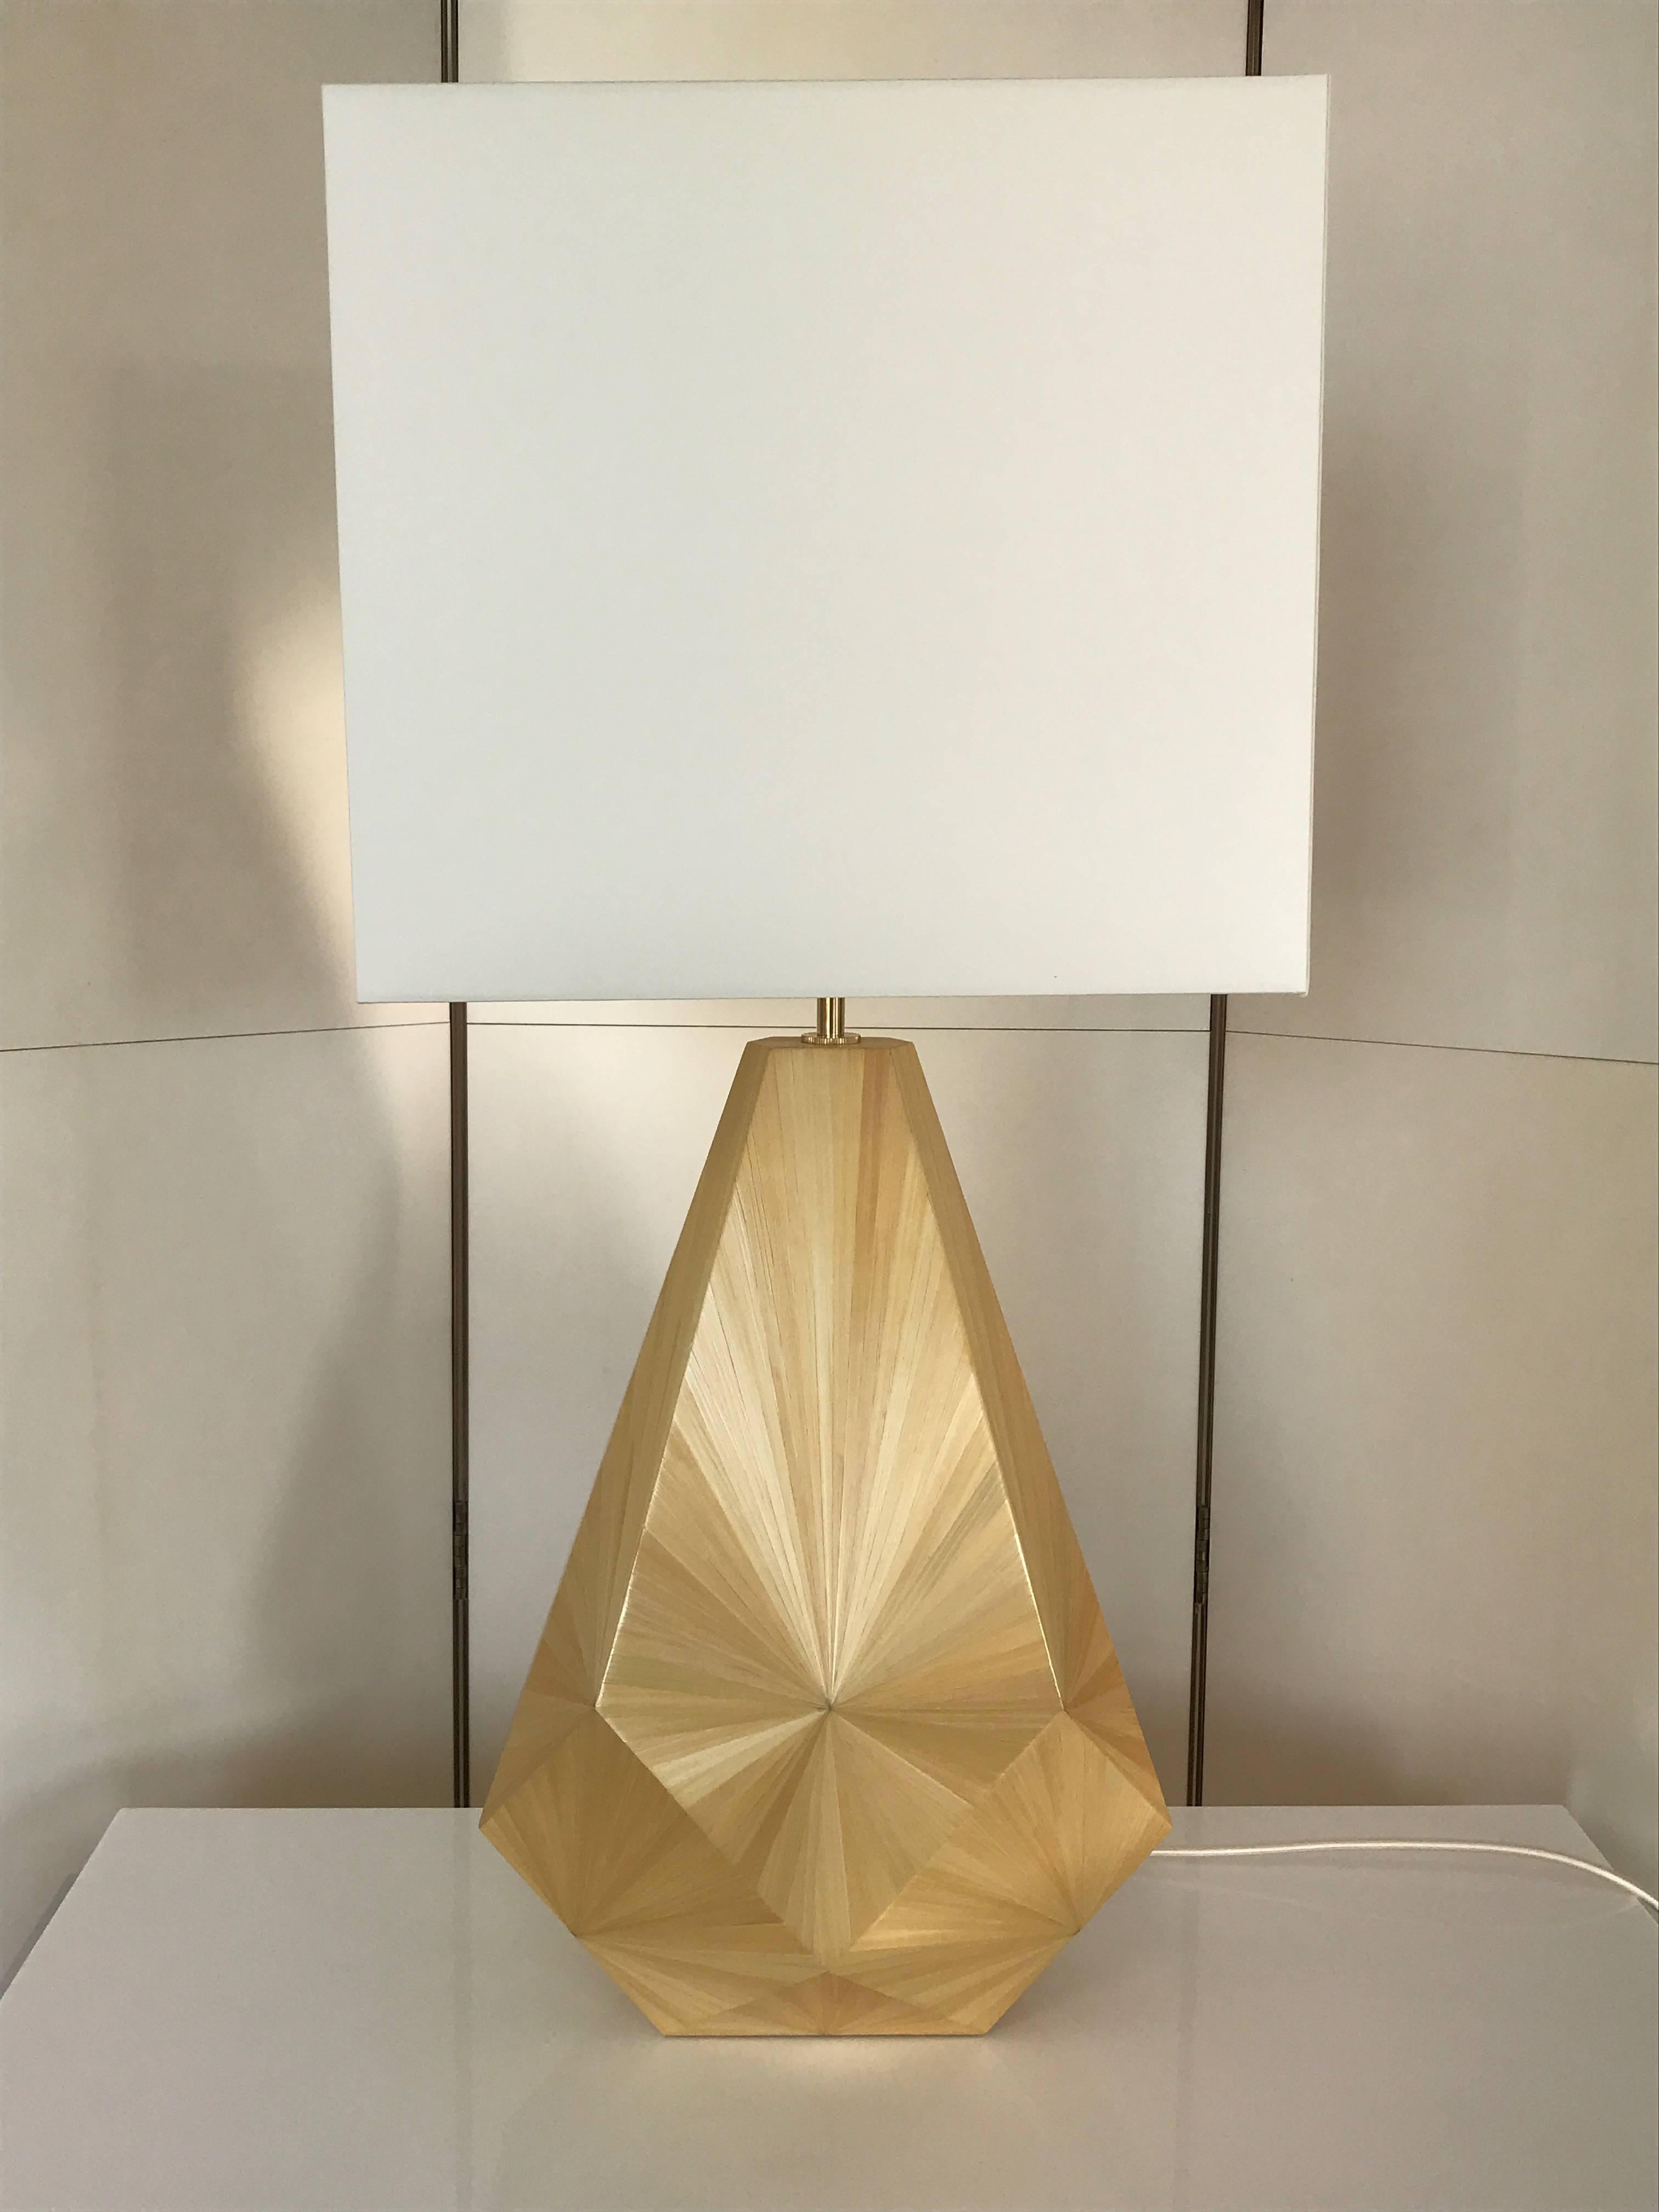 French Art Deco Inspired Straw Marquetry Lamps Designed by Jallu Model Lise In New Condition For Sale In Bazouges la Perouse, FR